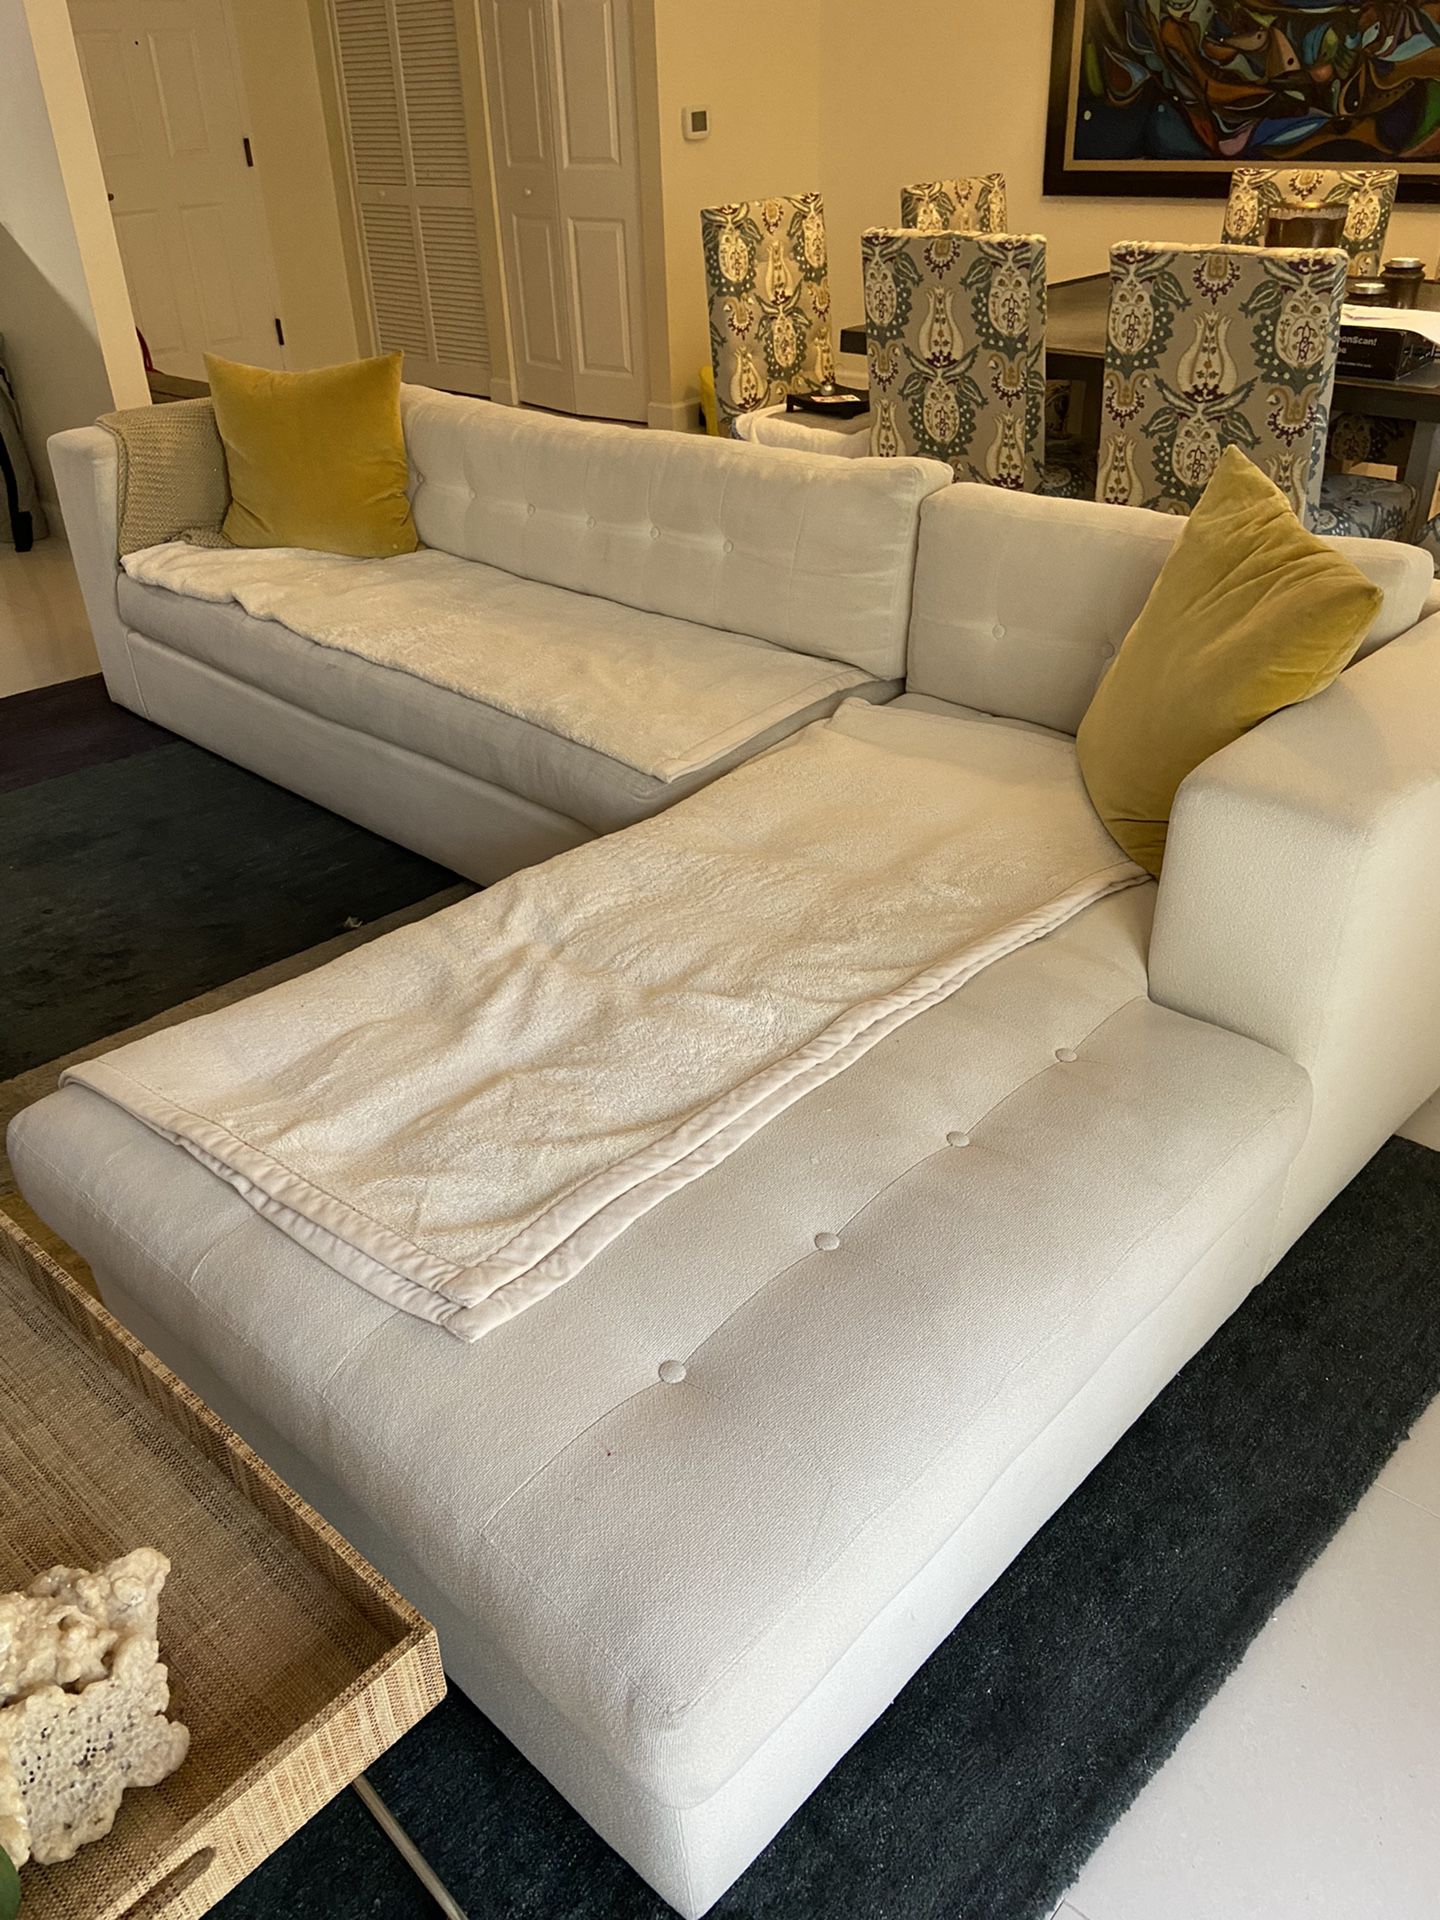 Large High End Sofa - Goose feathers' cushions